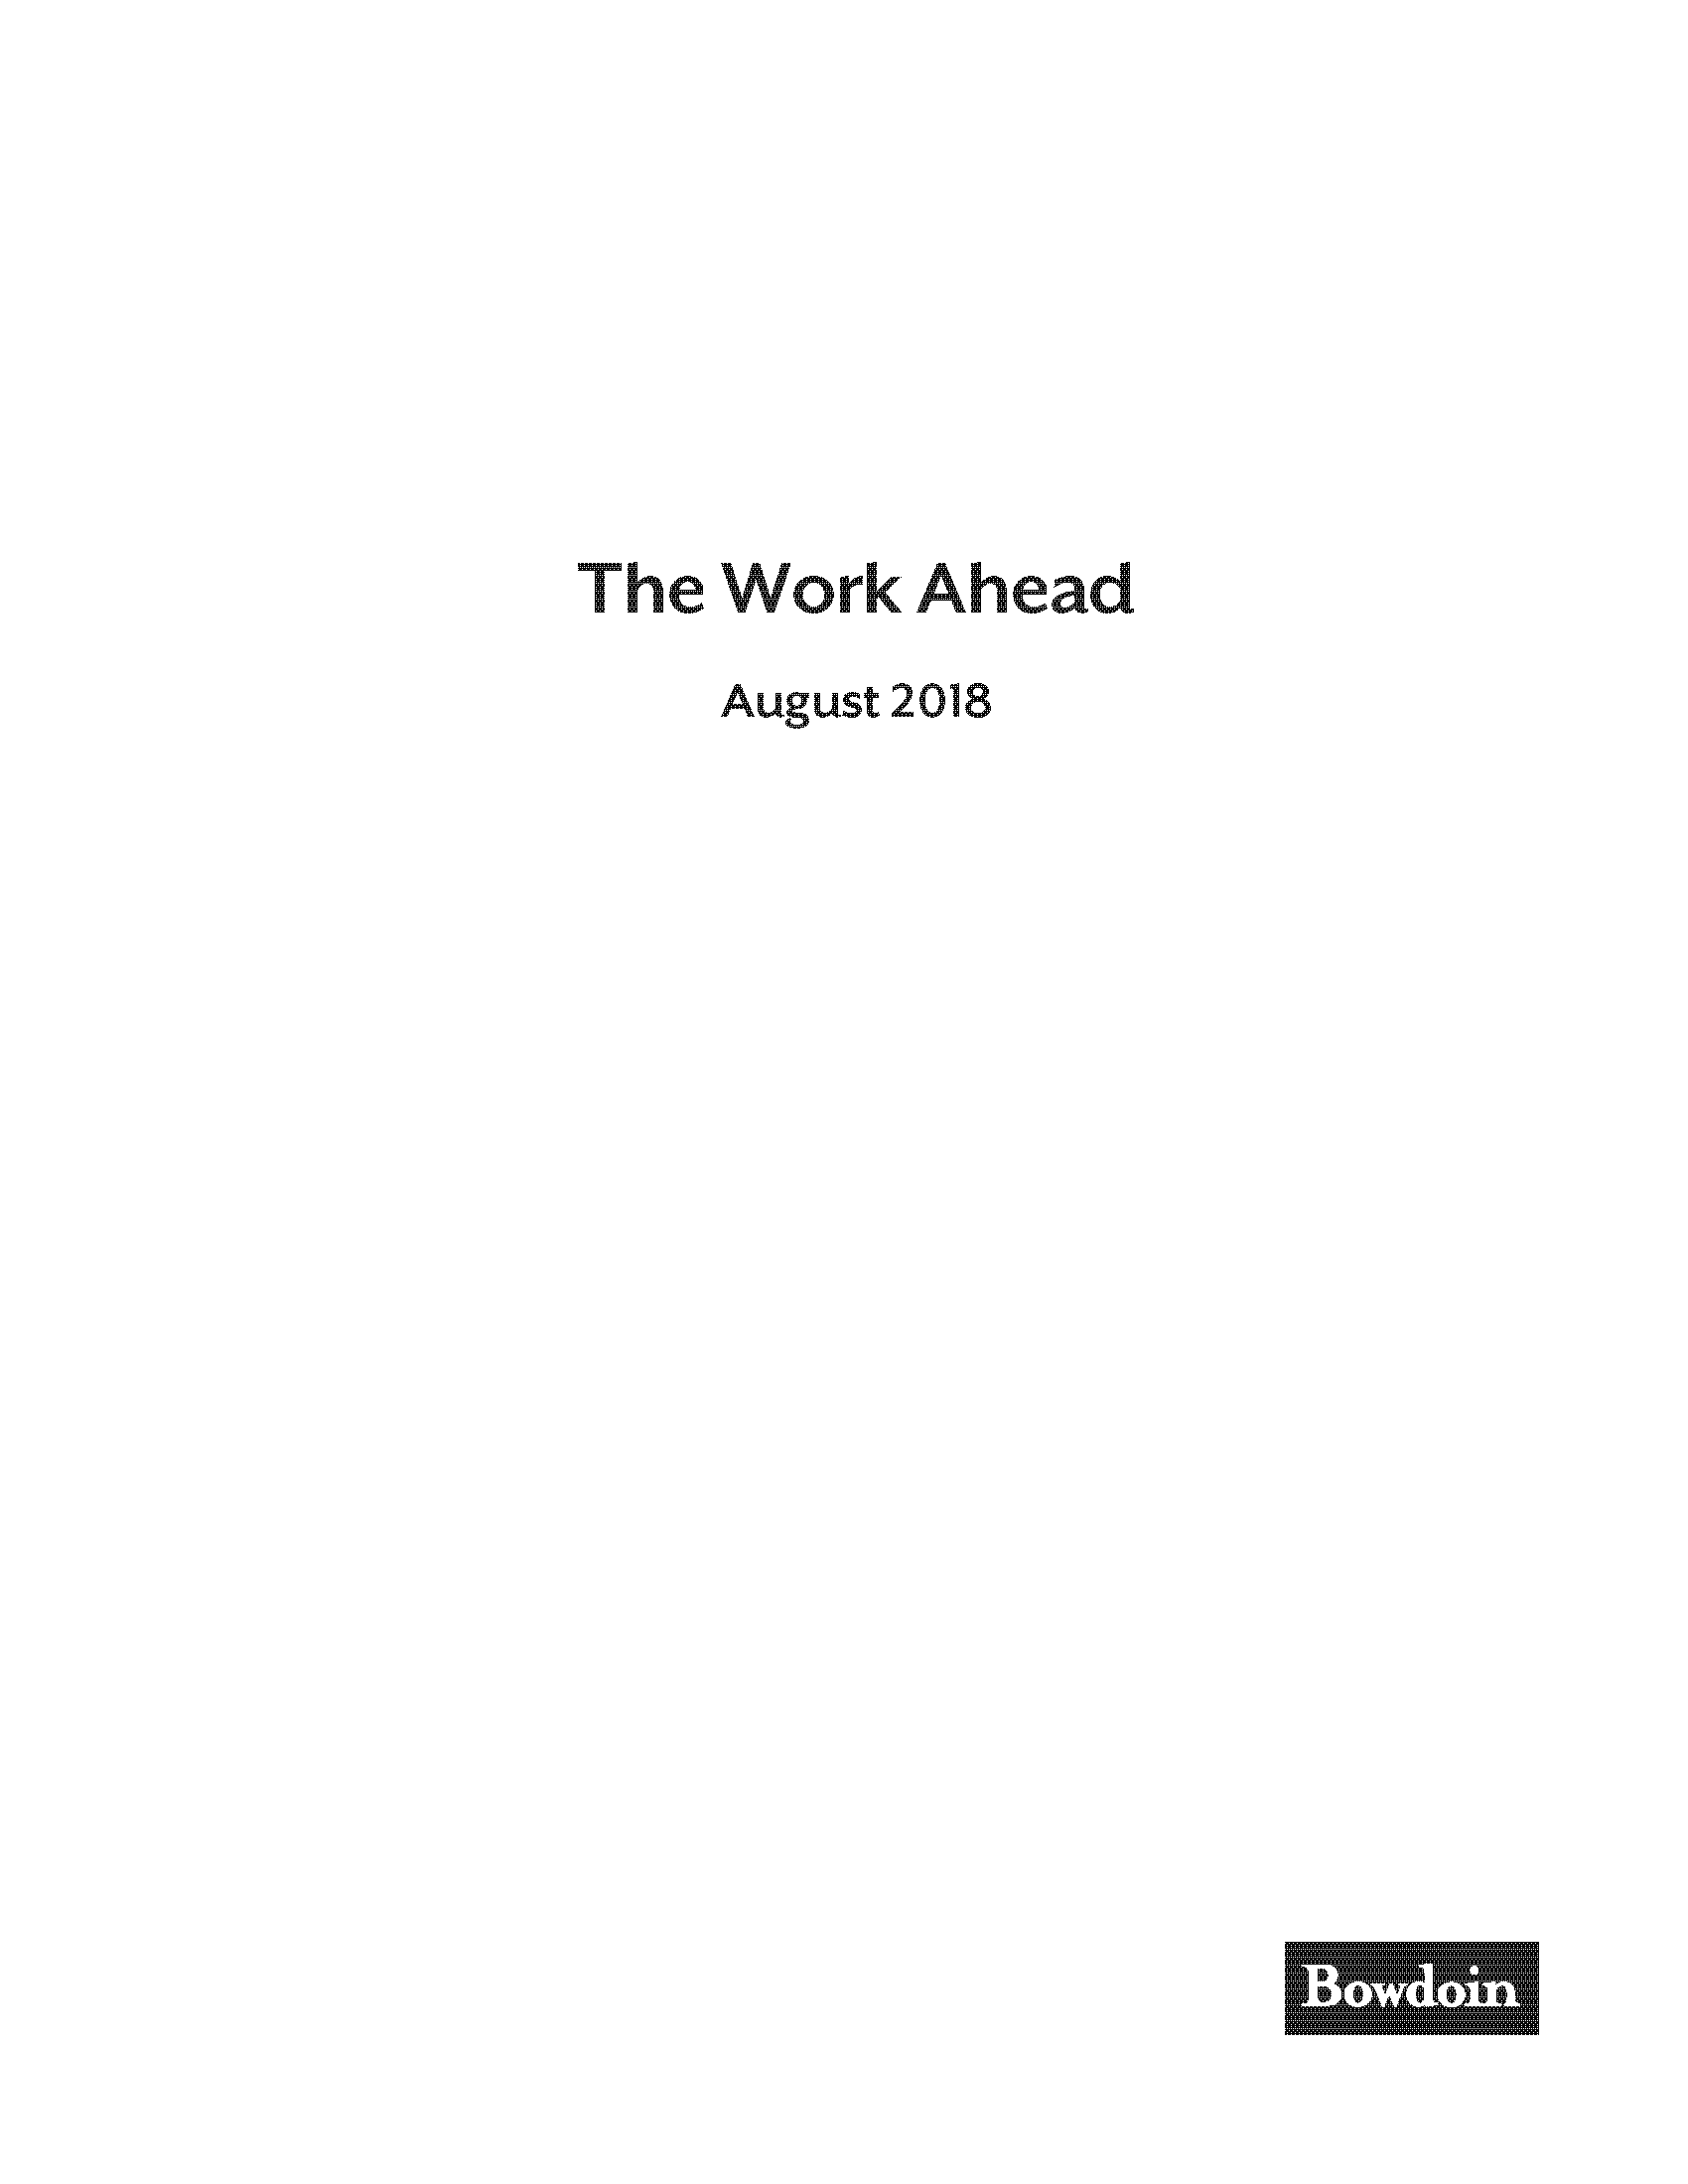 The work ahead title page